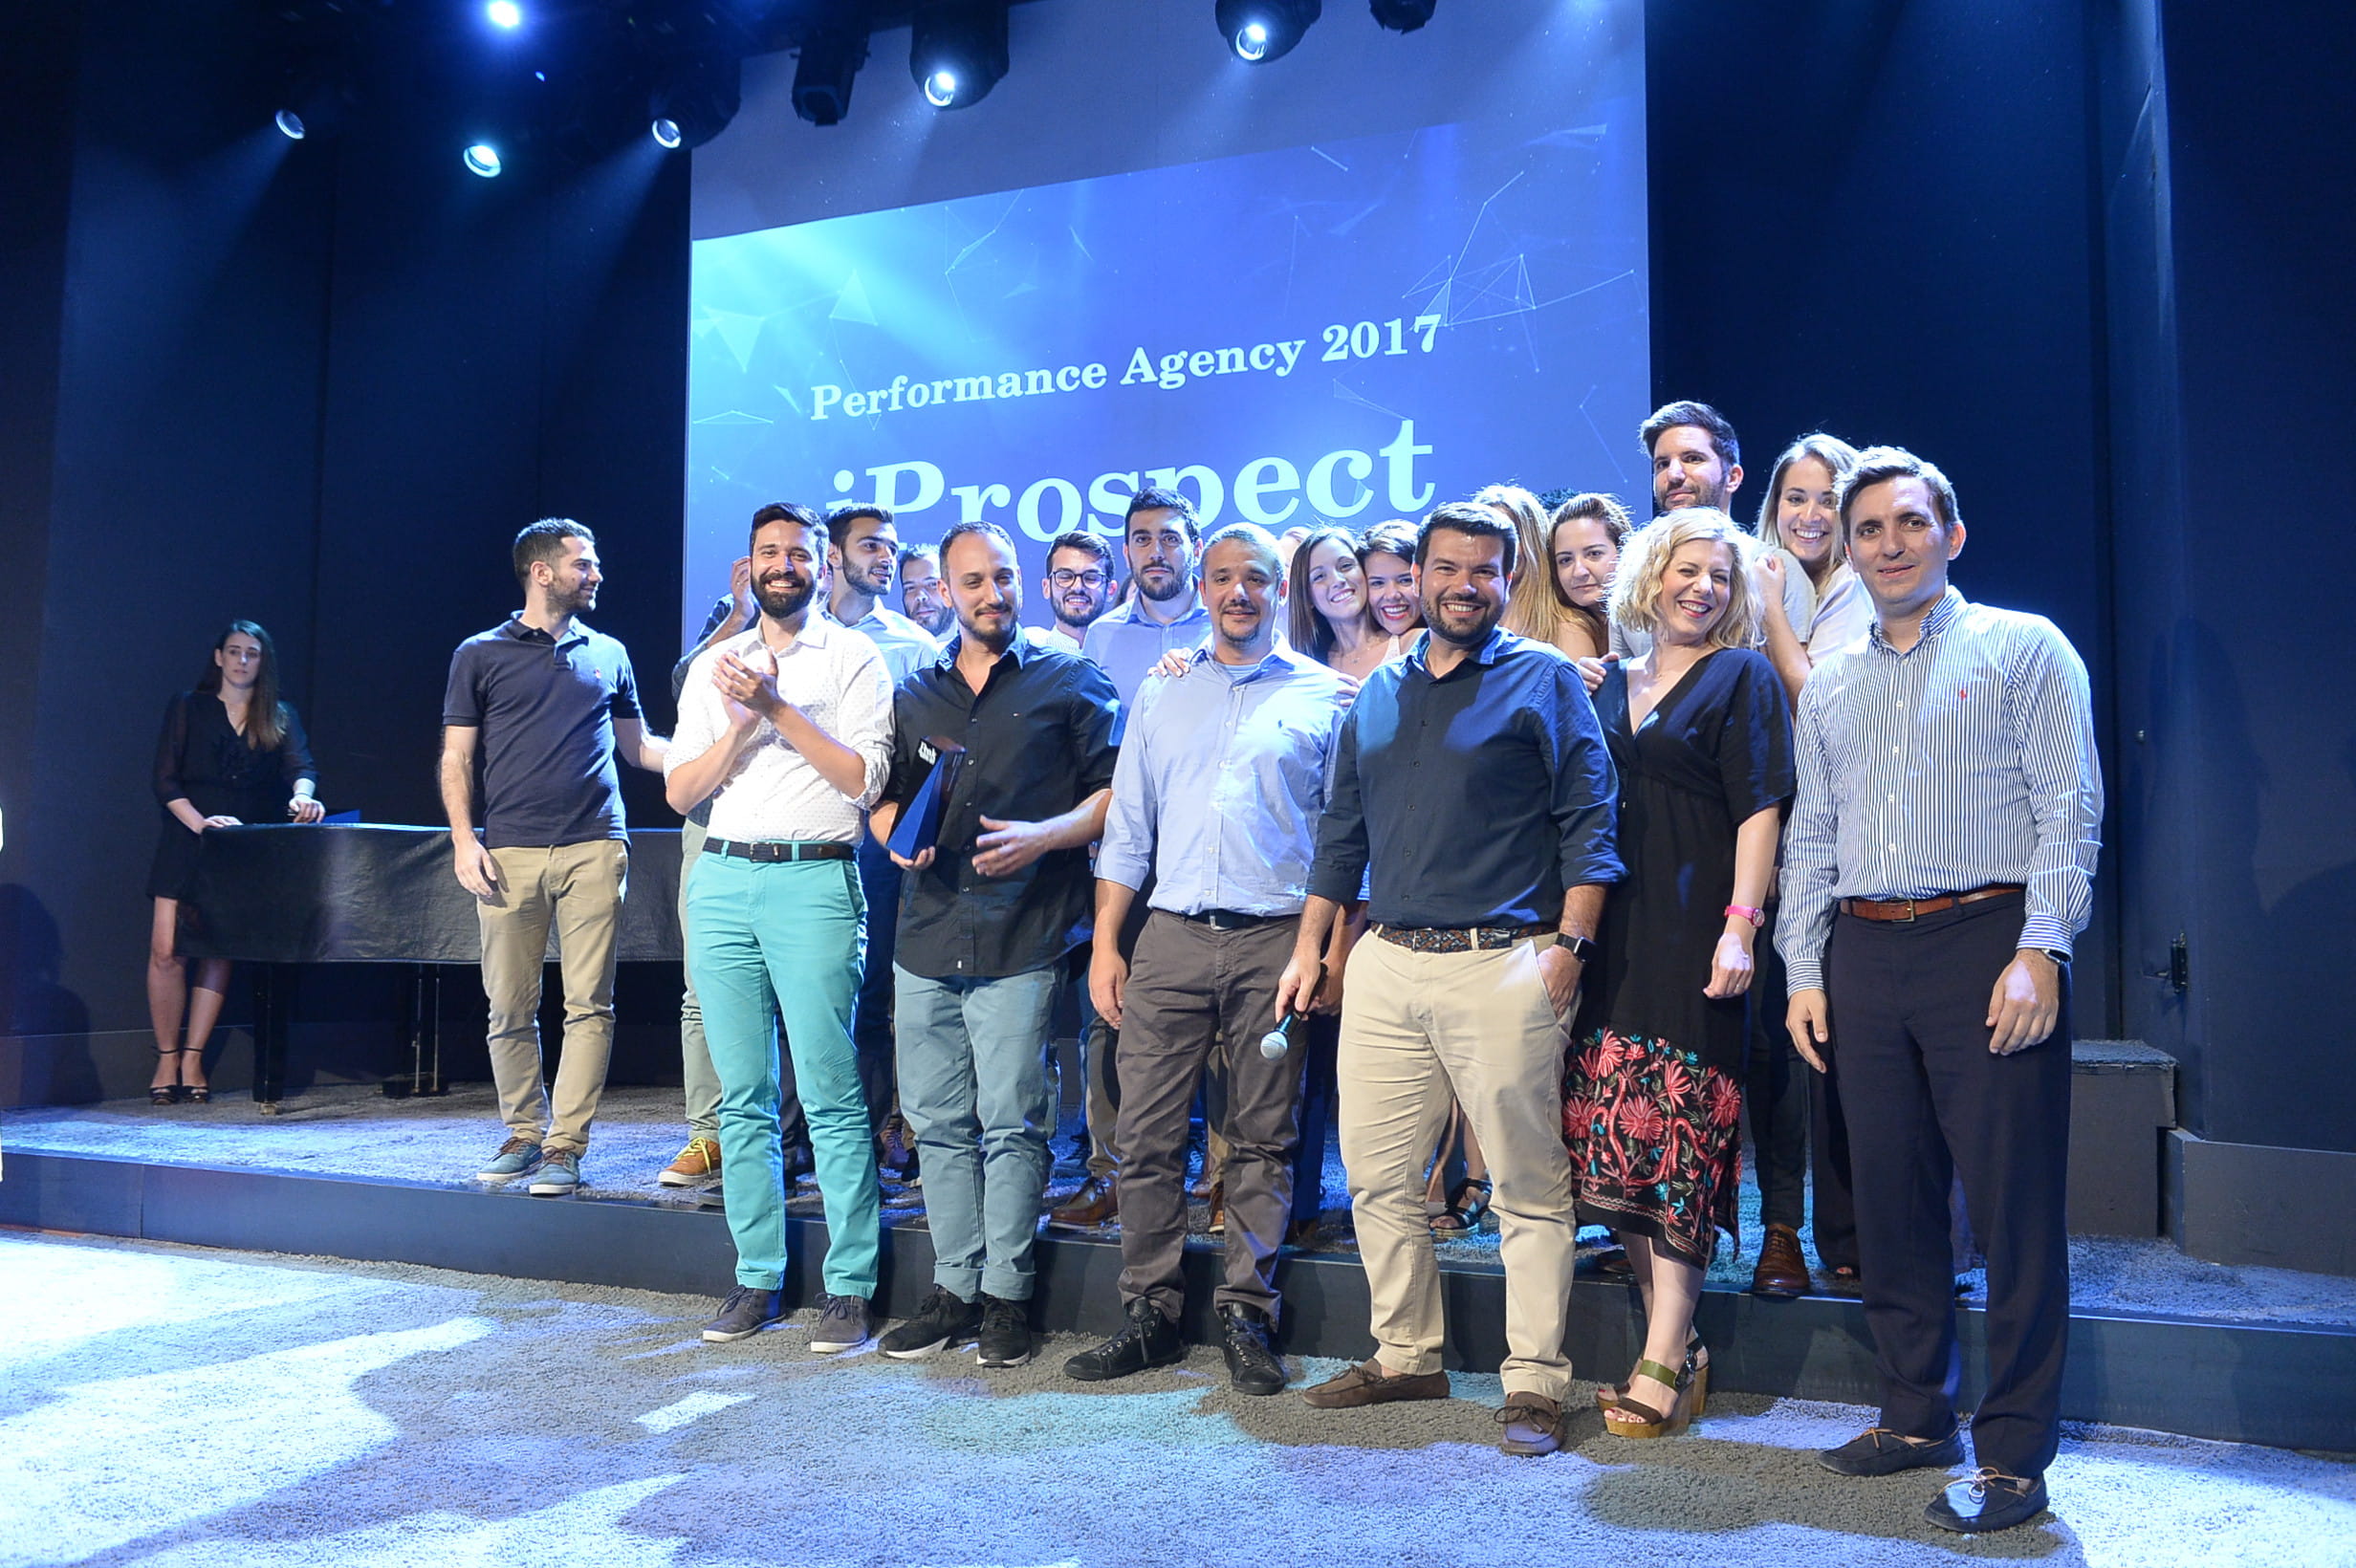 iProspect named "Performance Agency of the Year"